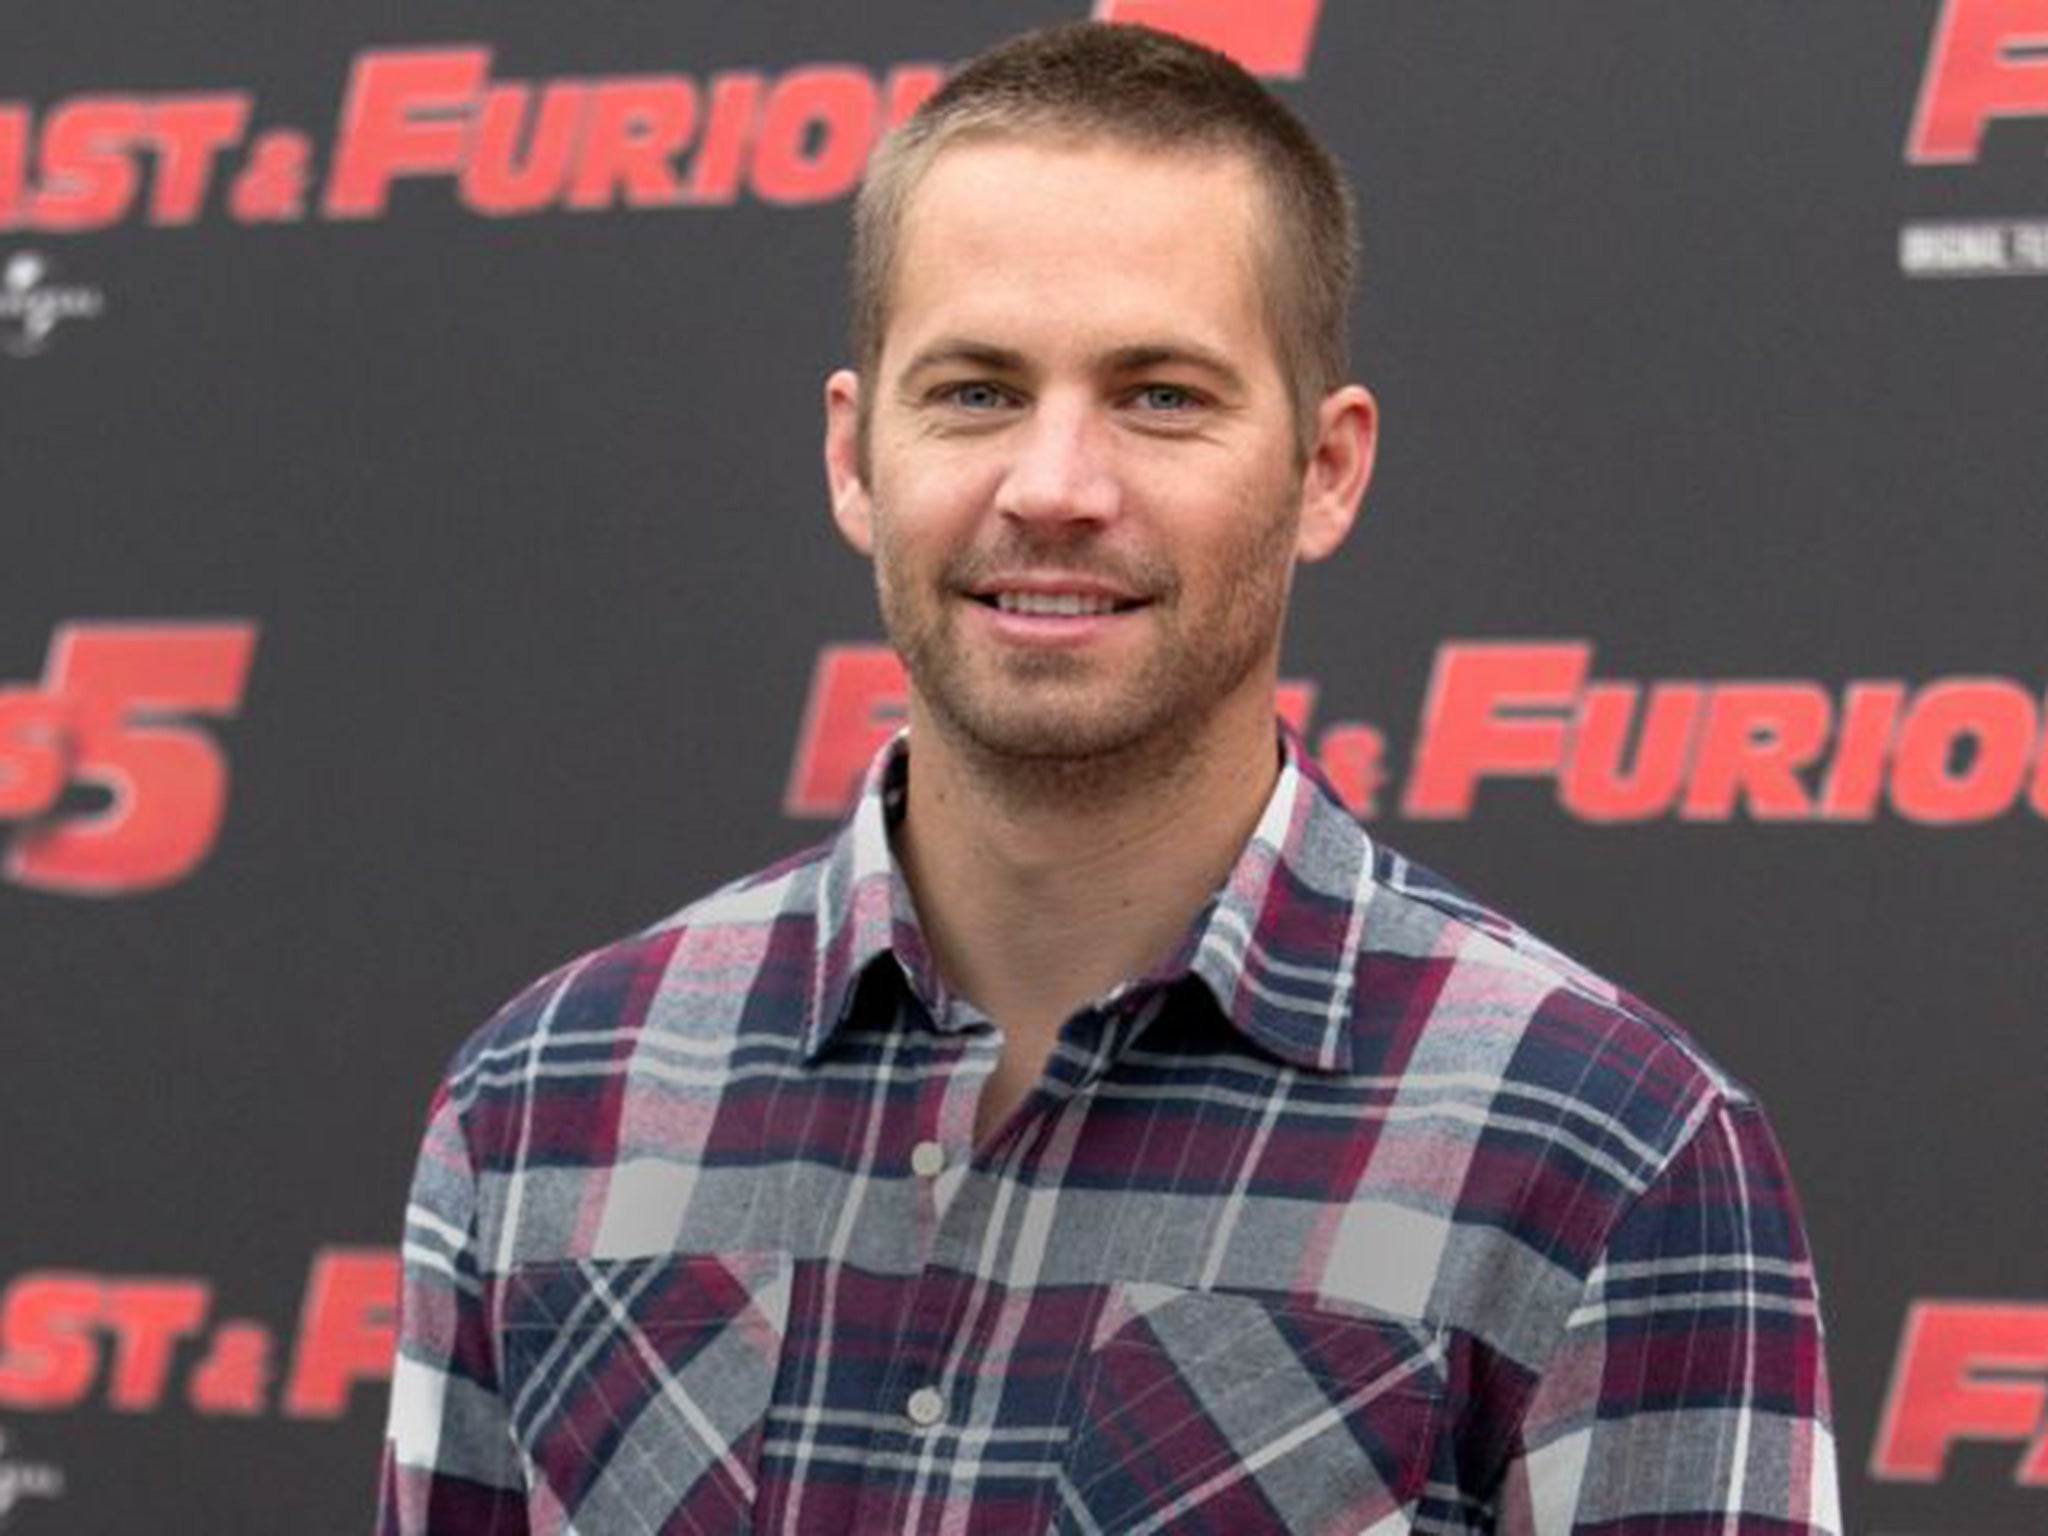 Actor Paul Walker’s daughter, Meadow, is suing Porsche over her father’s death in a lawsuit that claims he was trapped in the burning car because of design flaws and the seat belt. The Fast and Furious star was killed when the Porsche Carrera GT he was a passenger in hit a pole in California in 2013. The driver, his friend Roger Rodas, also died when the vehicle burst into flames.